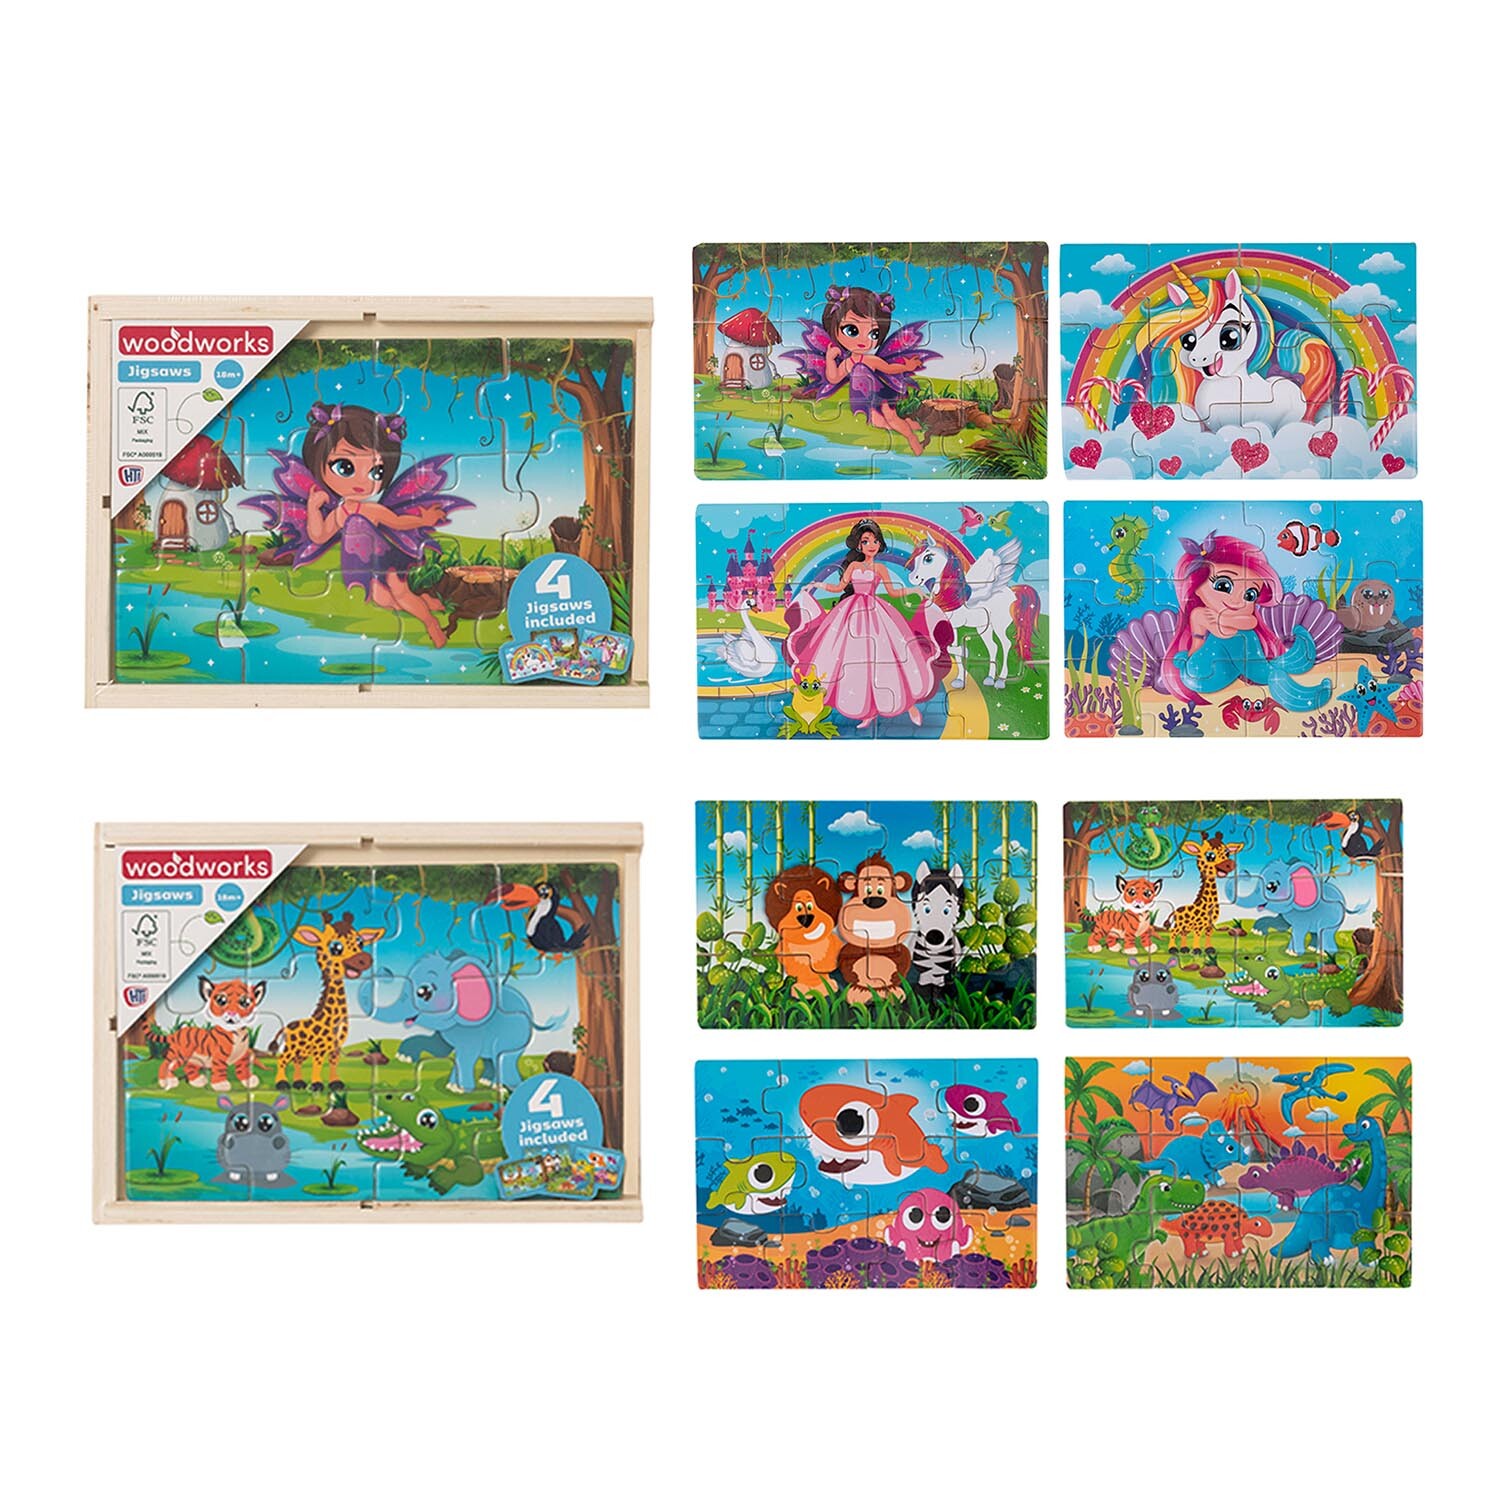 Woodworks 4 Wooden Puzzles in Box Image